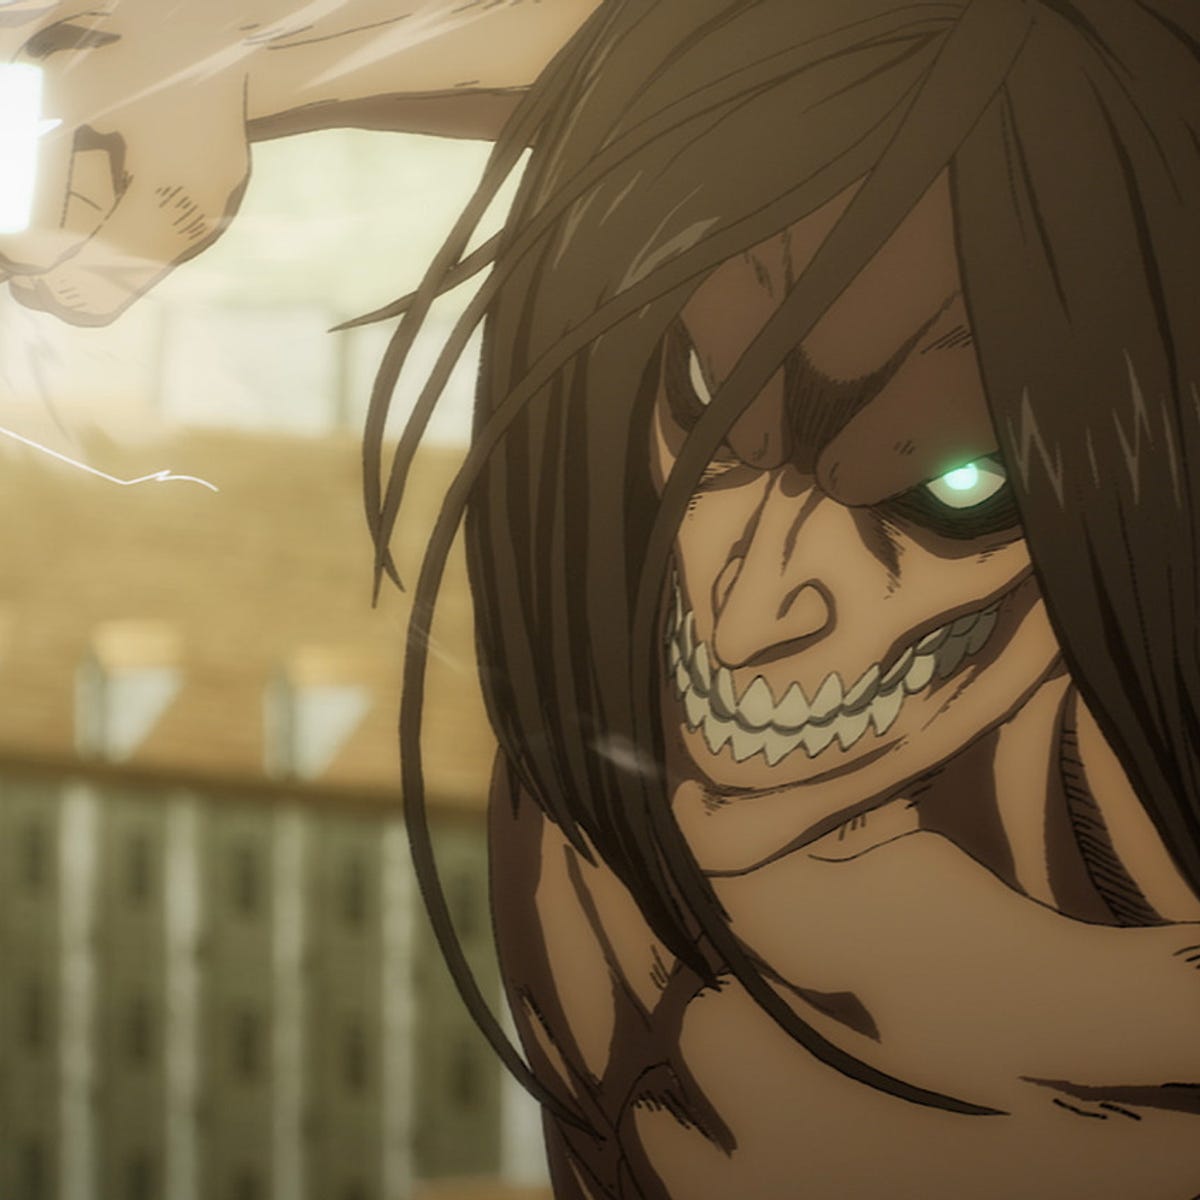 Attack on Titan Final Season Part 3: When Will This Popular Anime